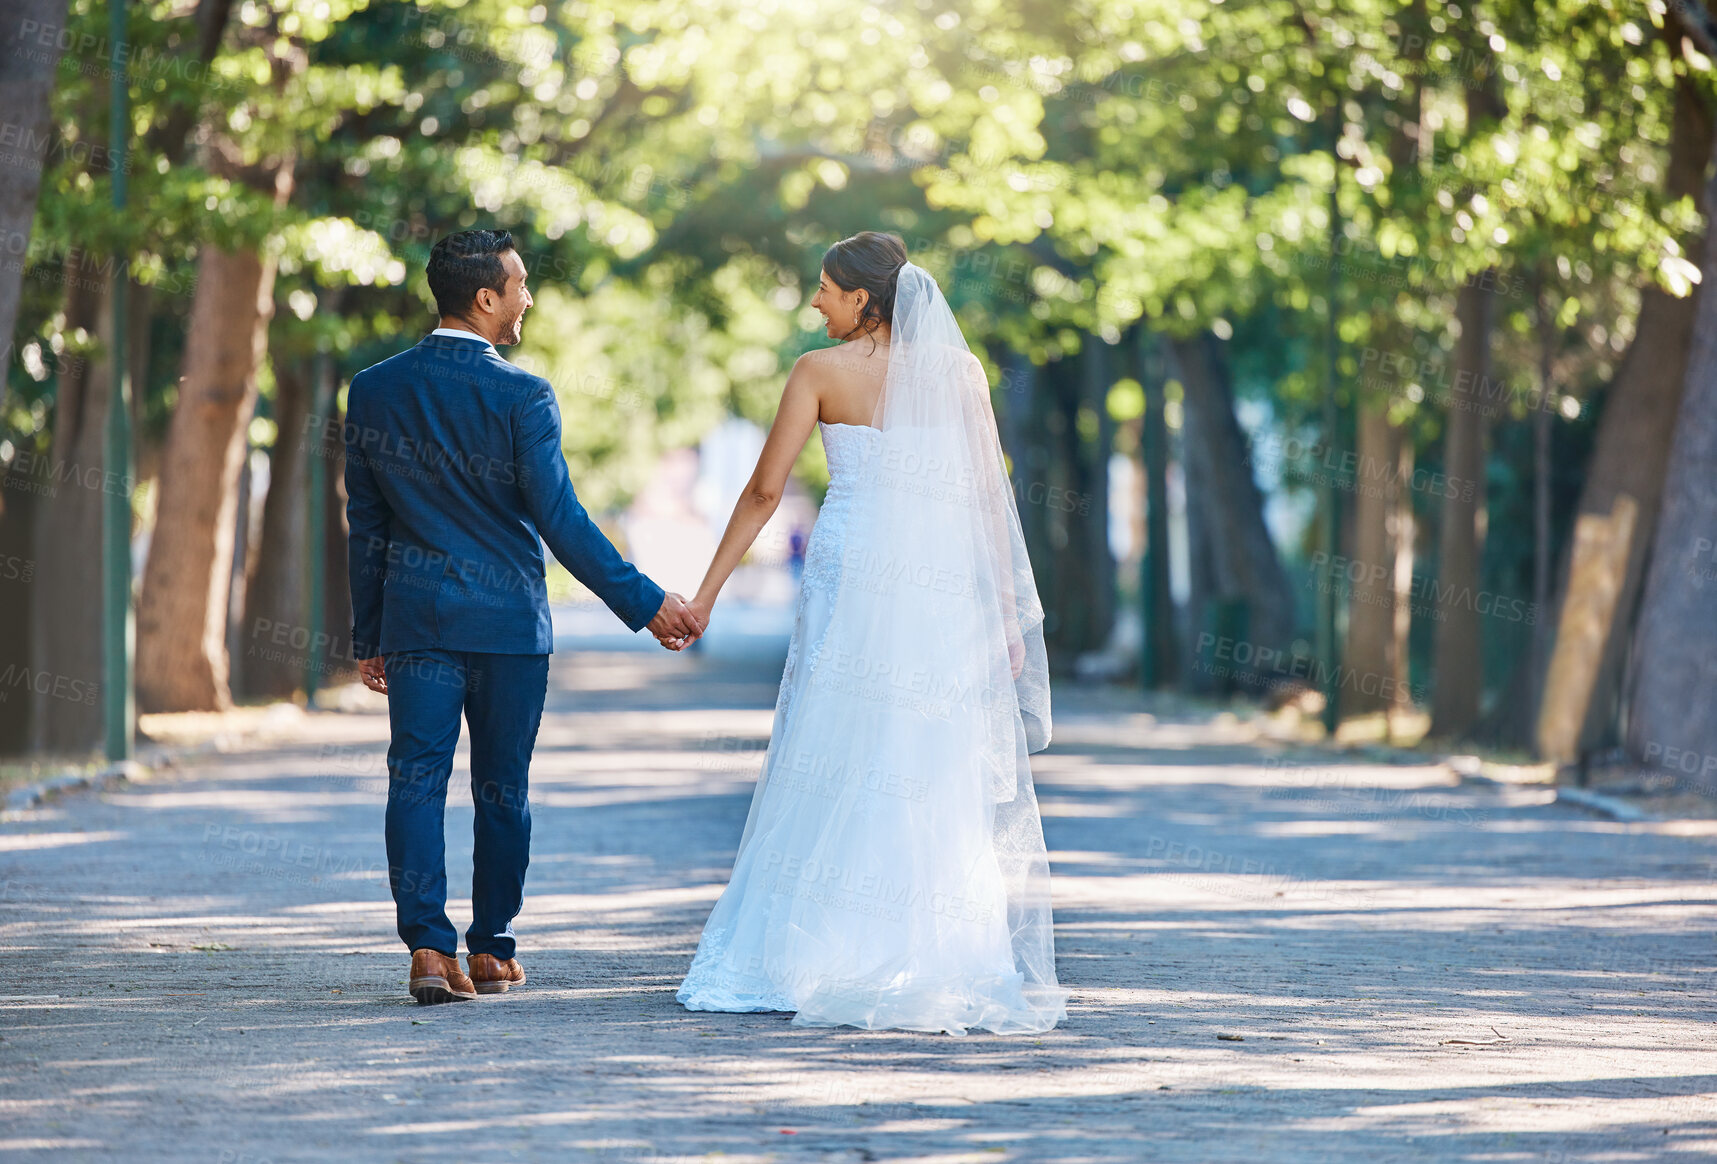 Buy stock photo Rear view shot of newlywed couple holding hands and walking through park. Bride and groom walking away after their wedding reception. Living happily ever after